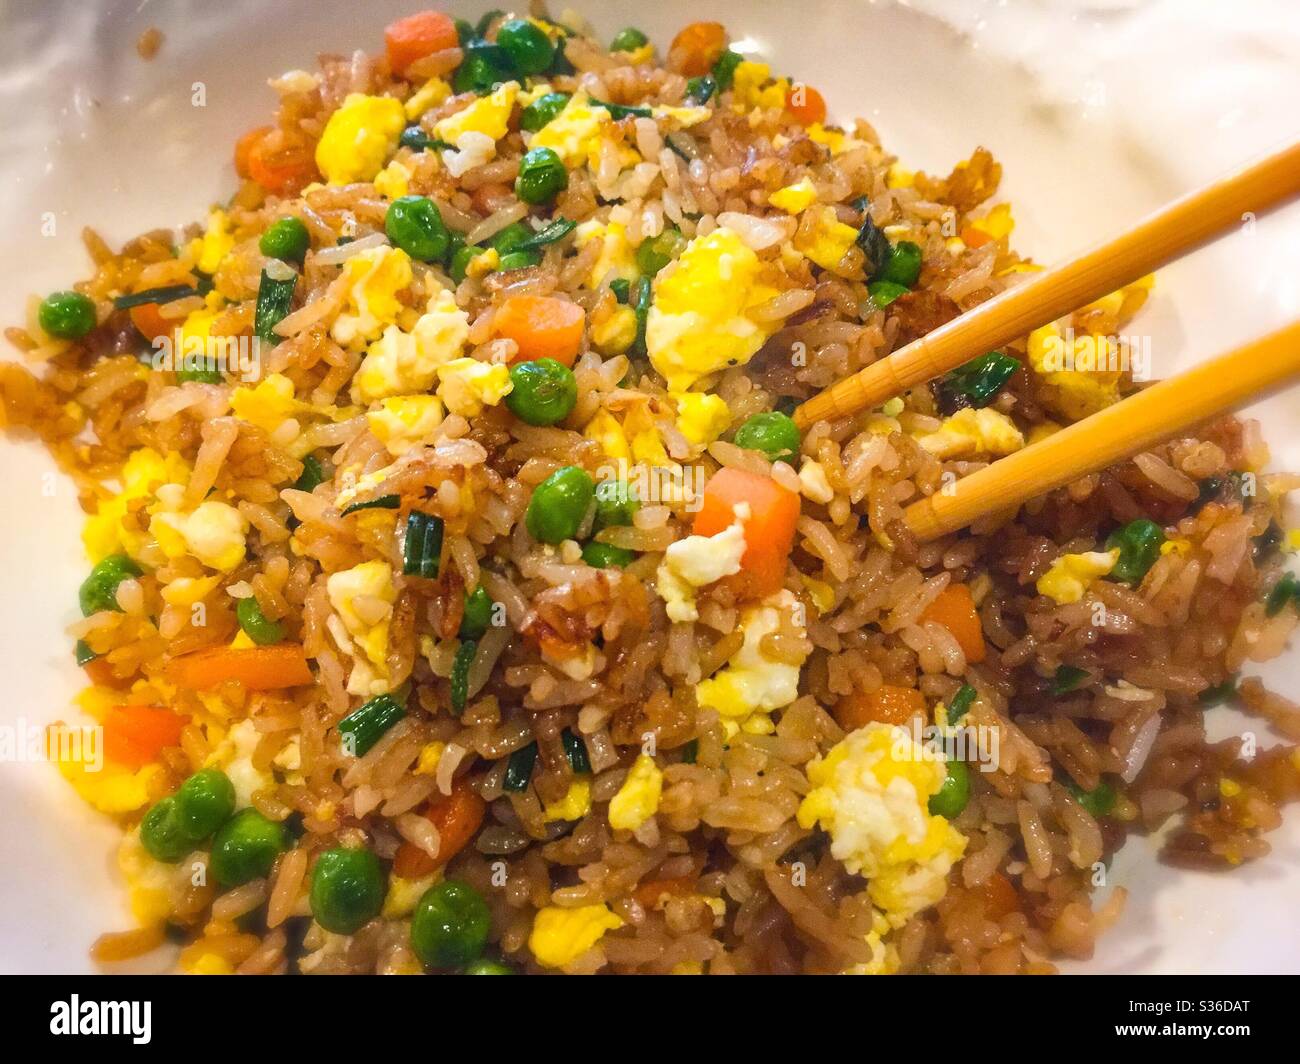 Vegetable fried rice and chopsticks. Stock Photo